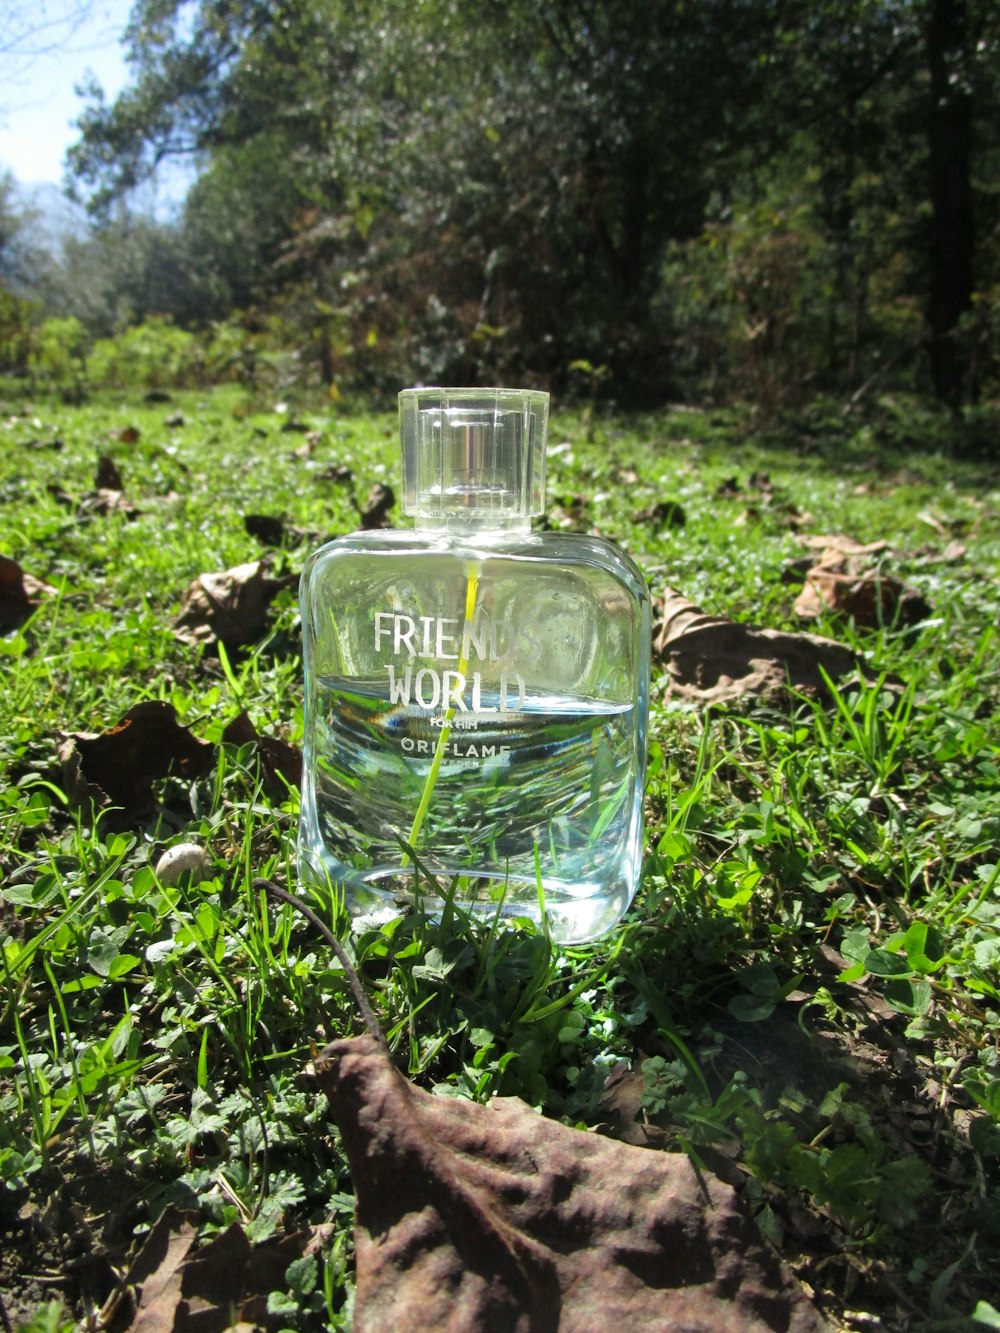 a glass bottle on the grass